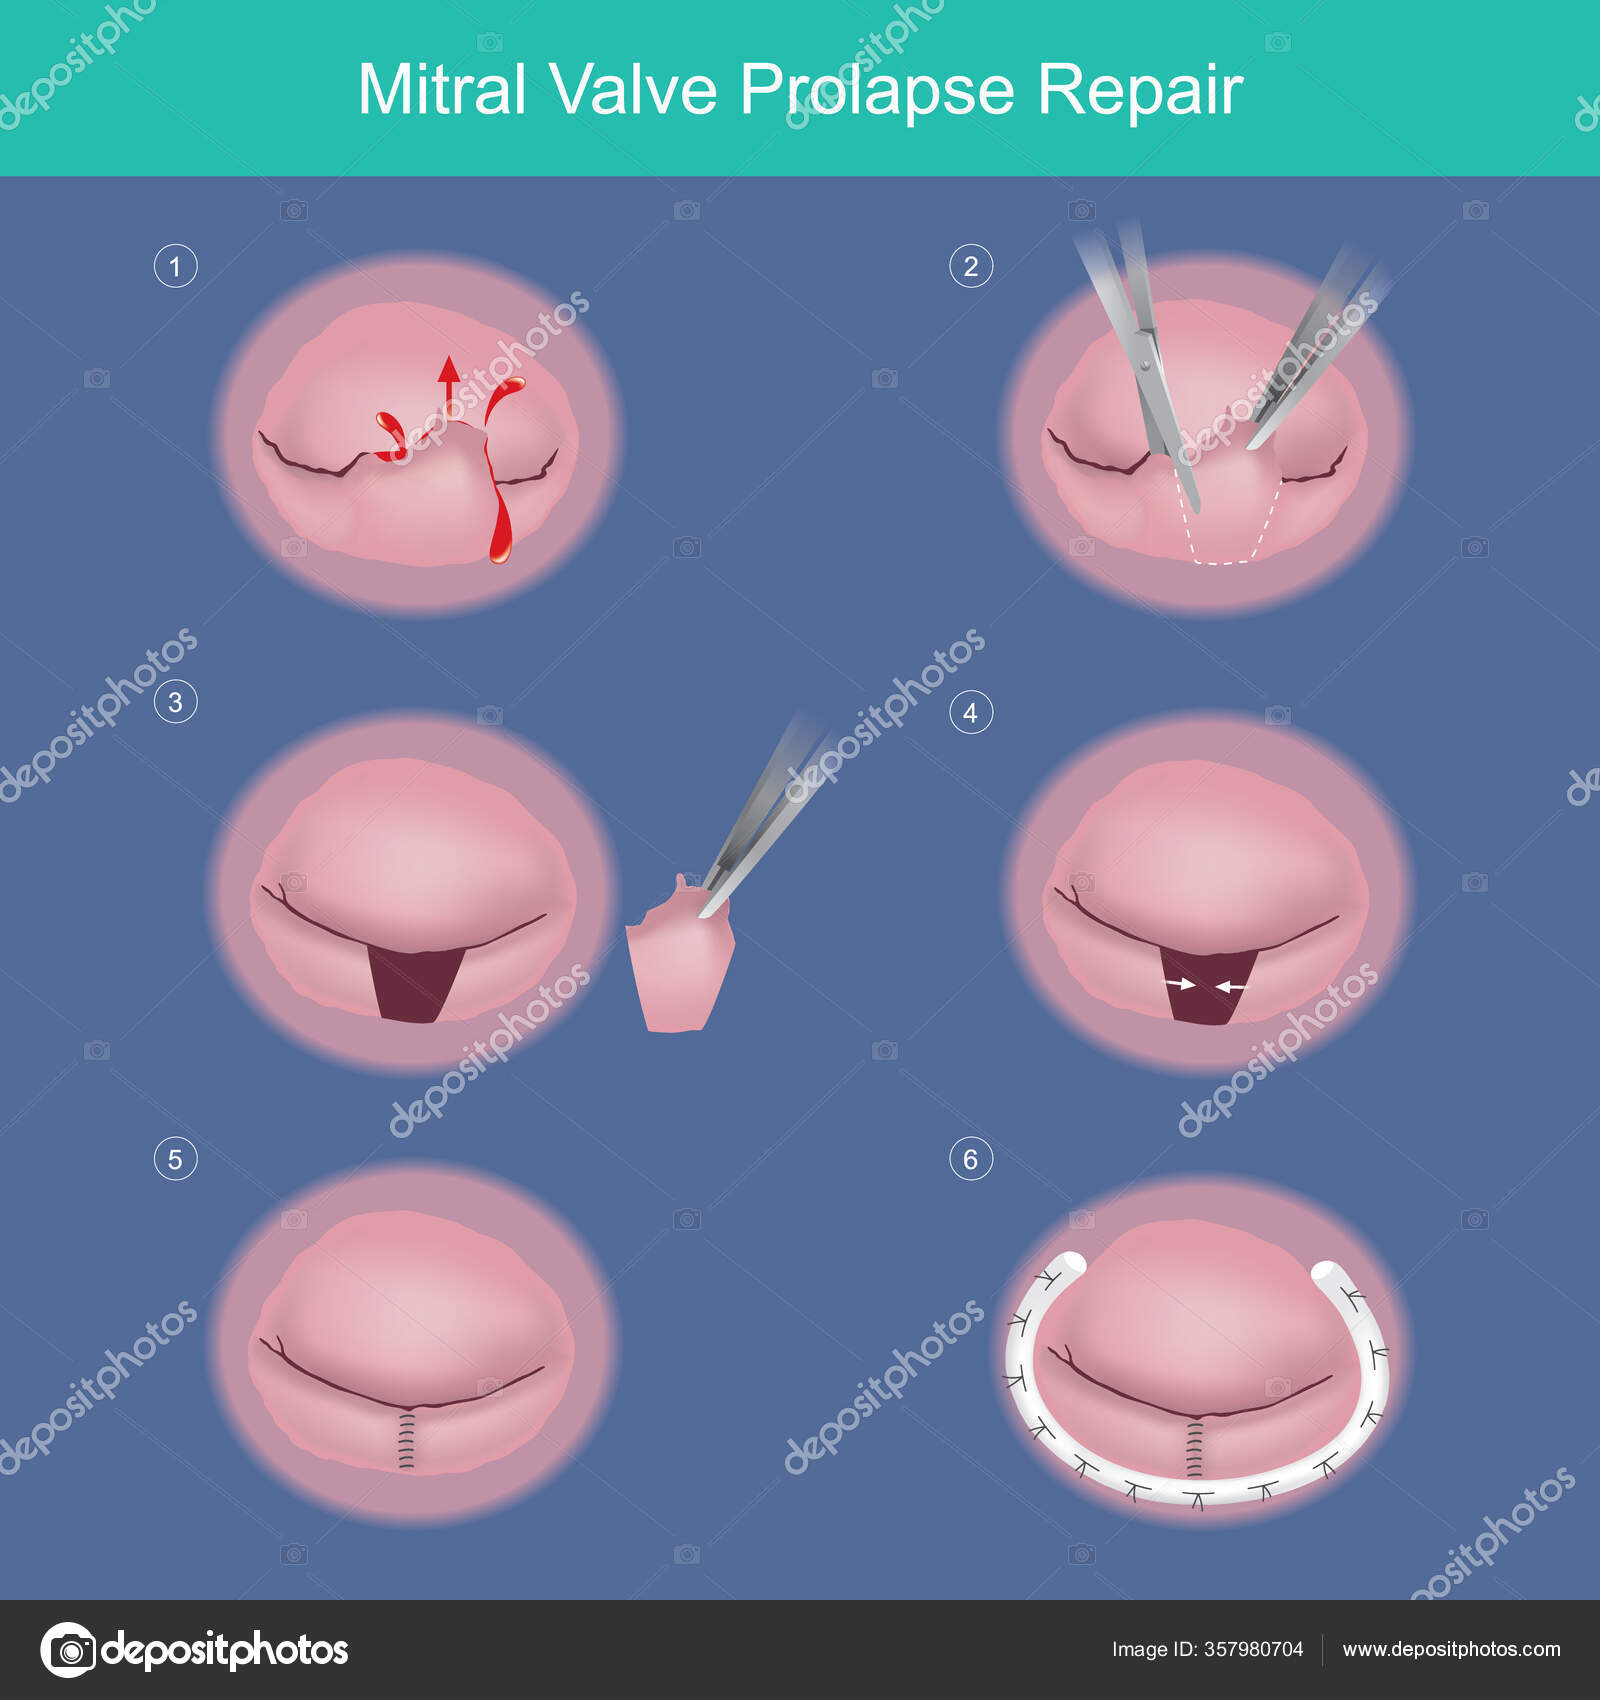 Minimally Invasive Surgical Mitral Valve Repair: State of the Art Review |  ICR Journal